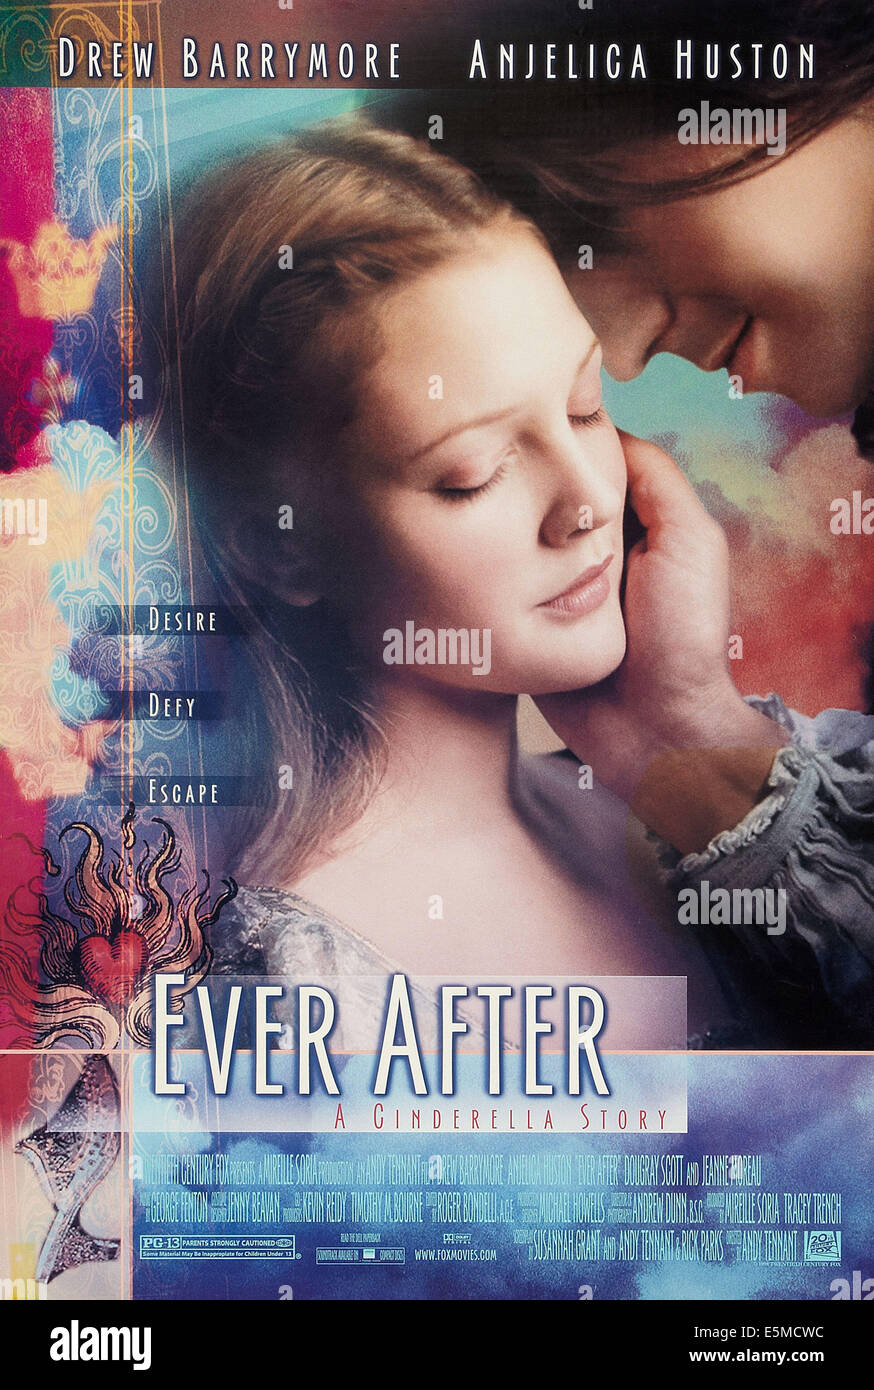 EVER AFTER, (EVER AFTER: A CINDERELLA STORY), Drew Barrymore, US poster art, 1998. Stock Photo